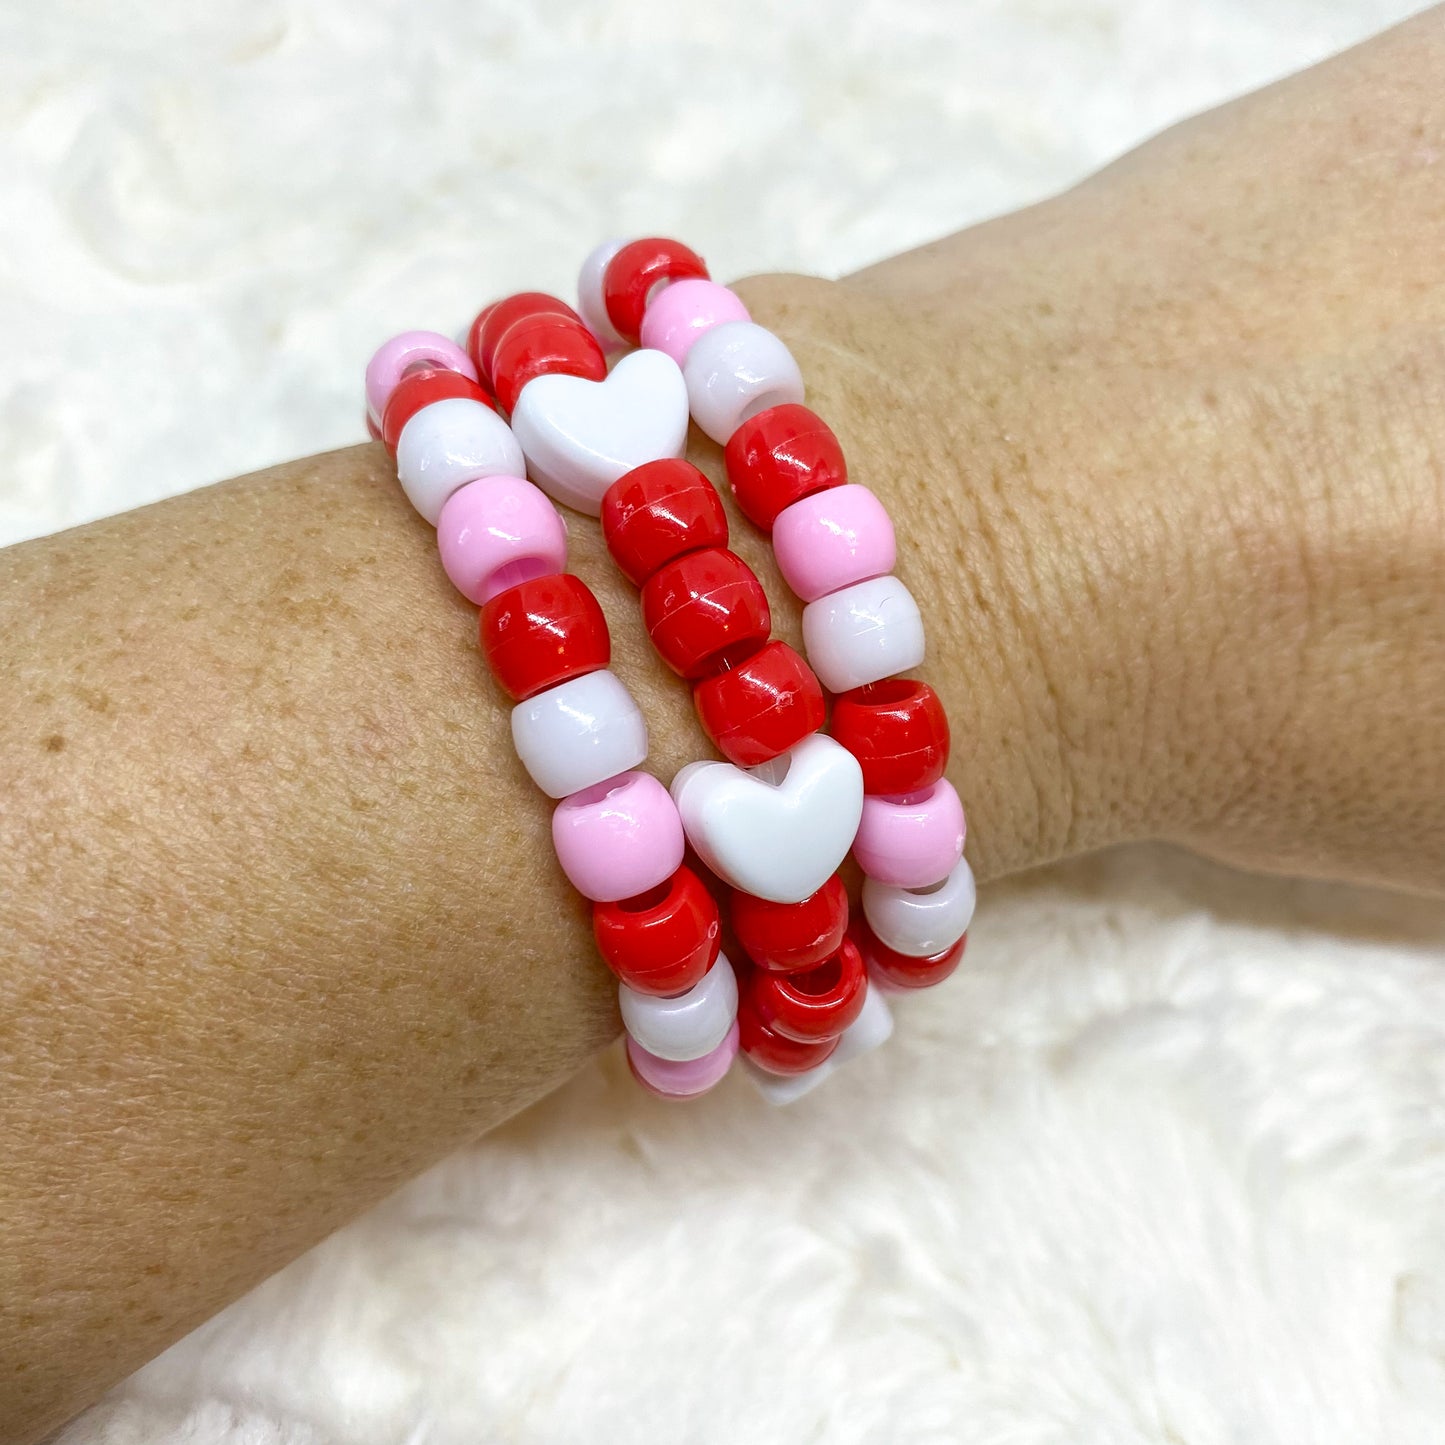 Red Queen of Hearts Preppy Red Clay Bead Bracelet 